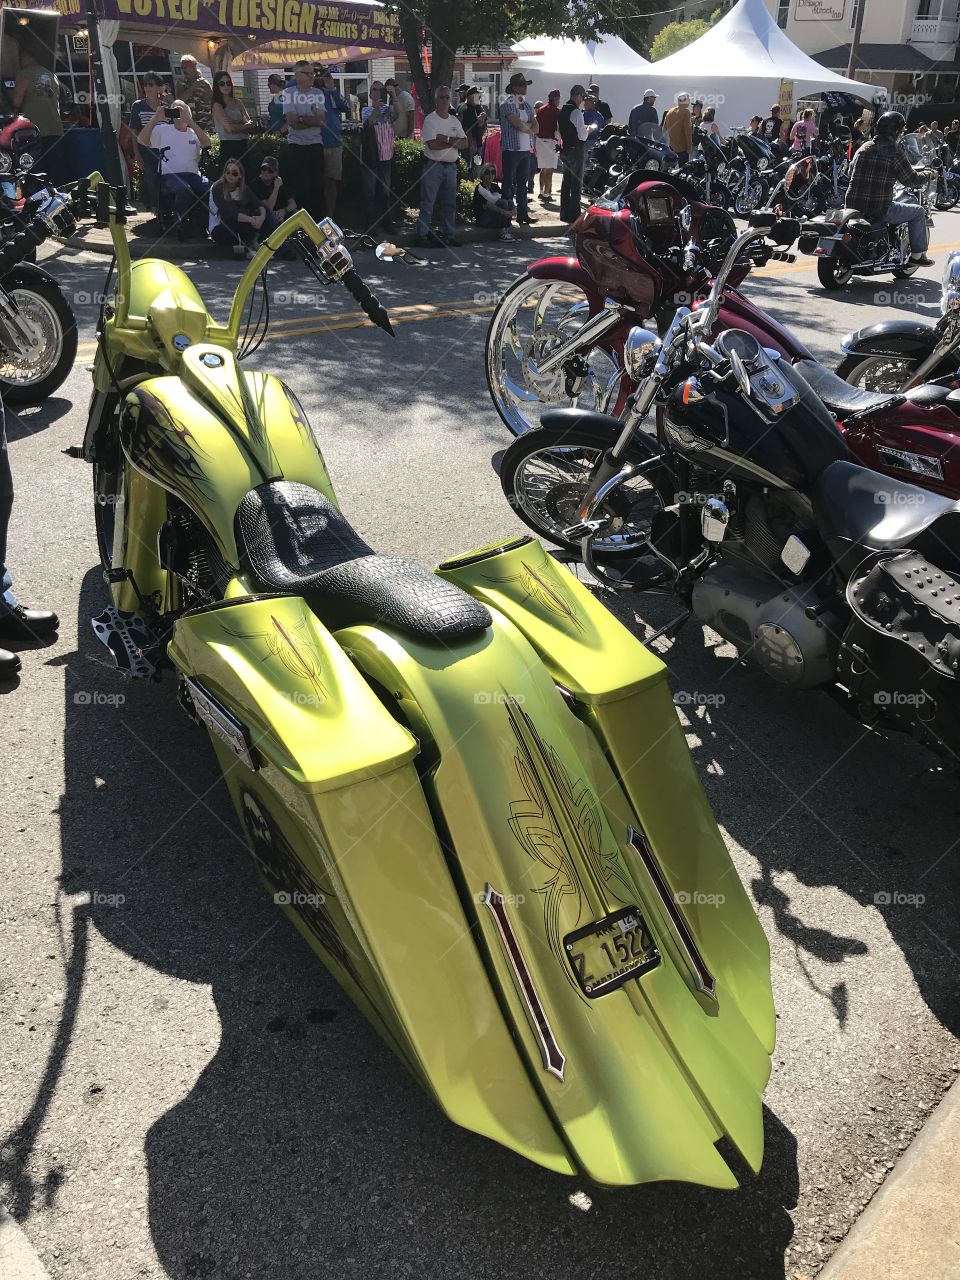 Different bikes at Bikes, Blues and Barbecue - Arkansas